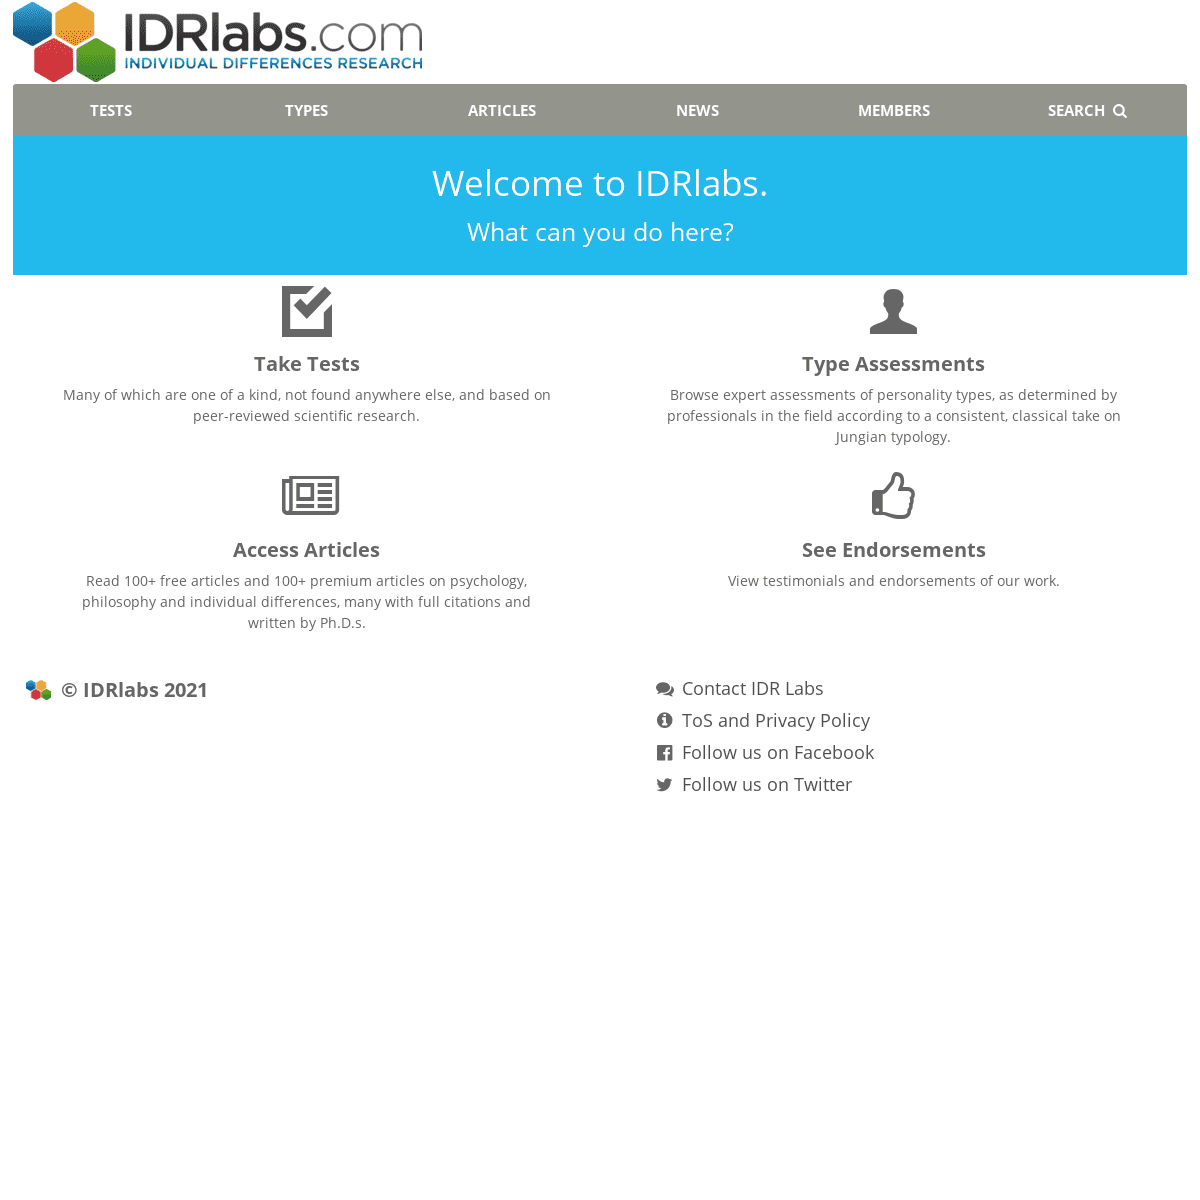 A complete backup of https://idrlabs.com